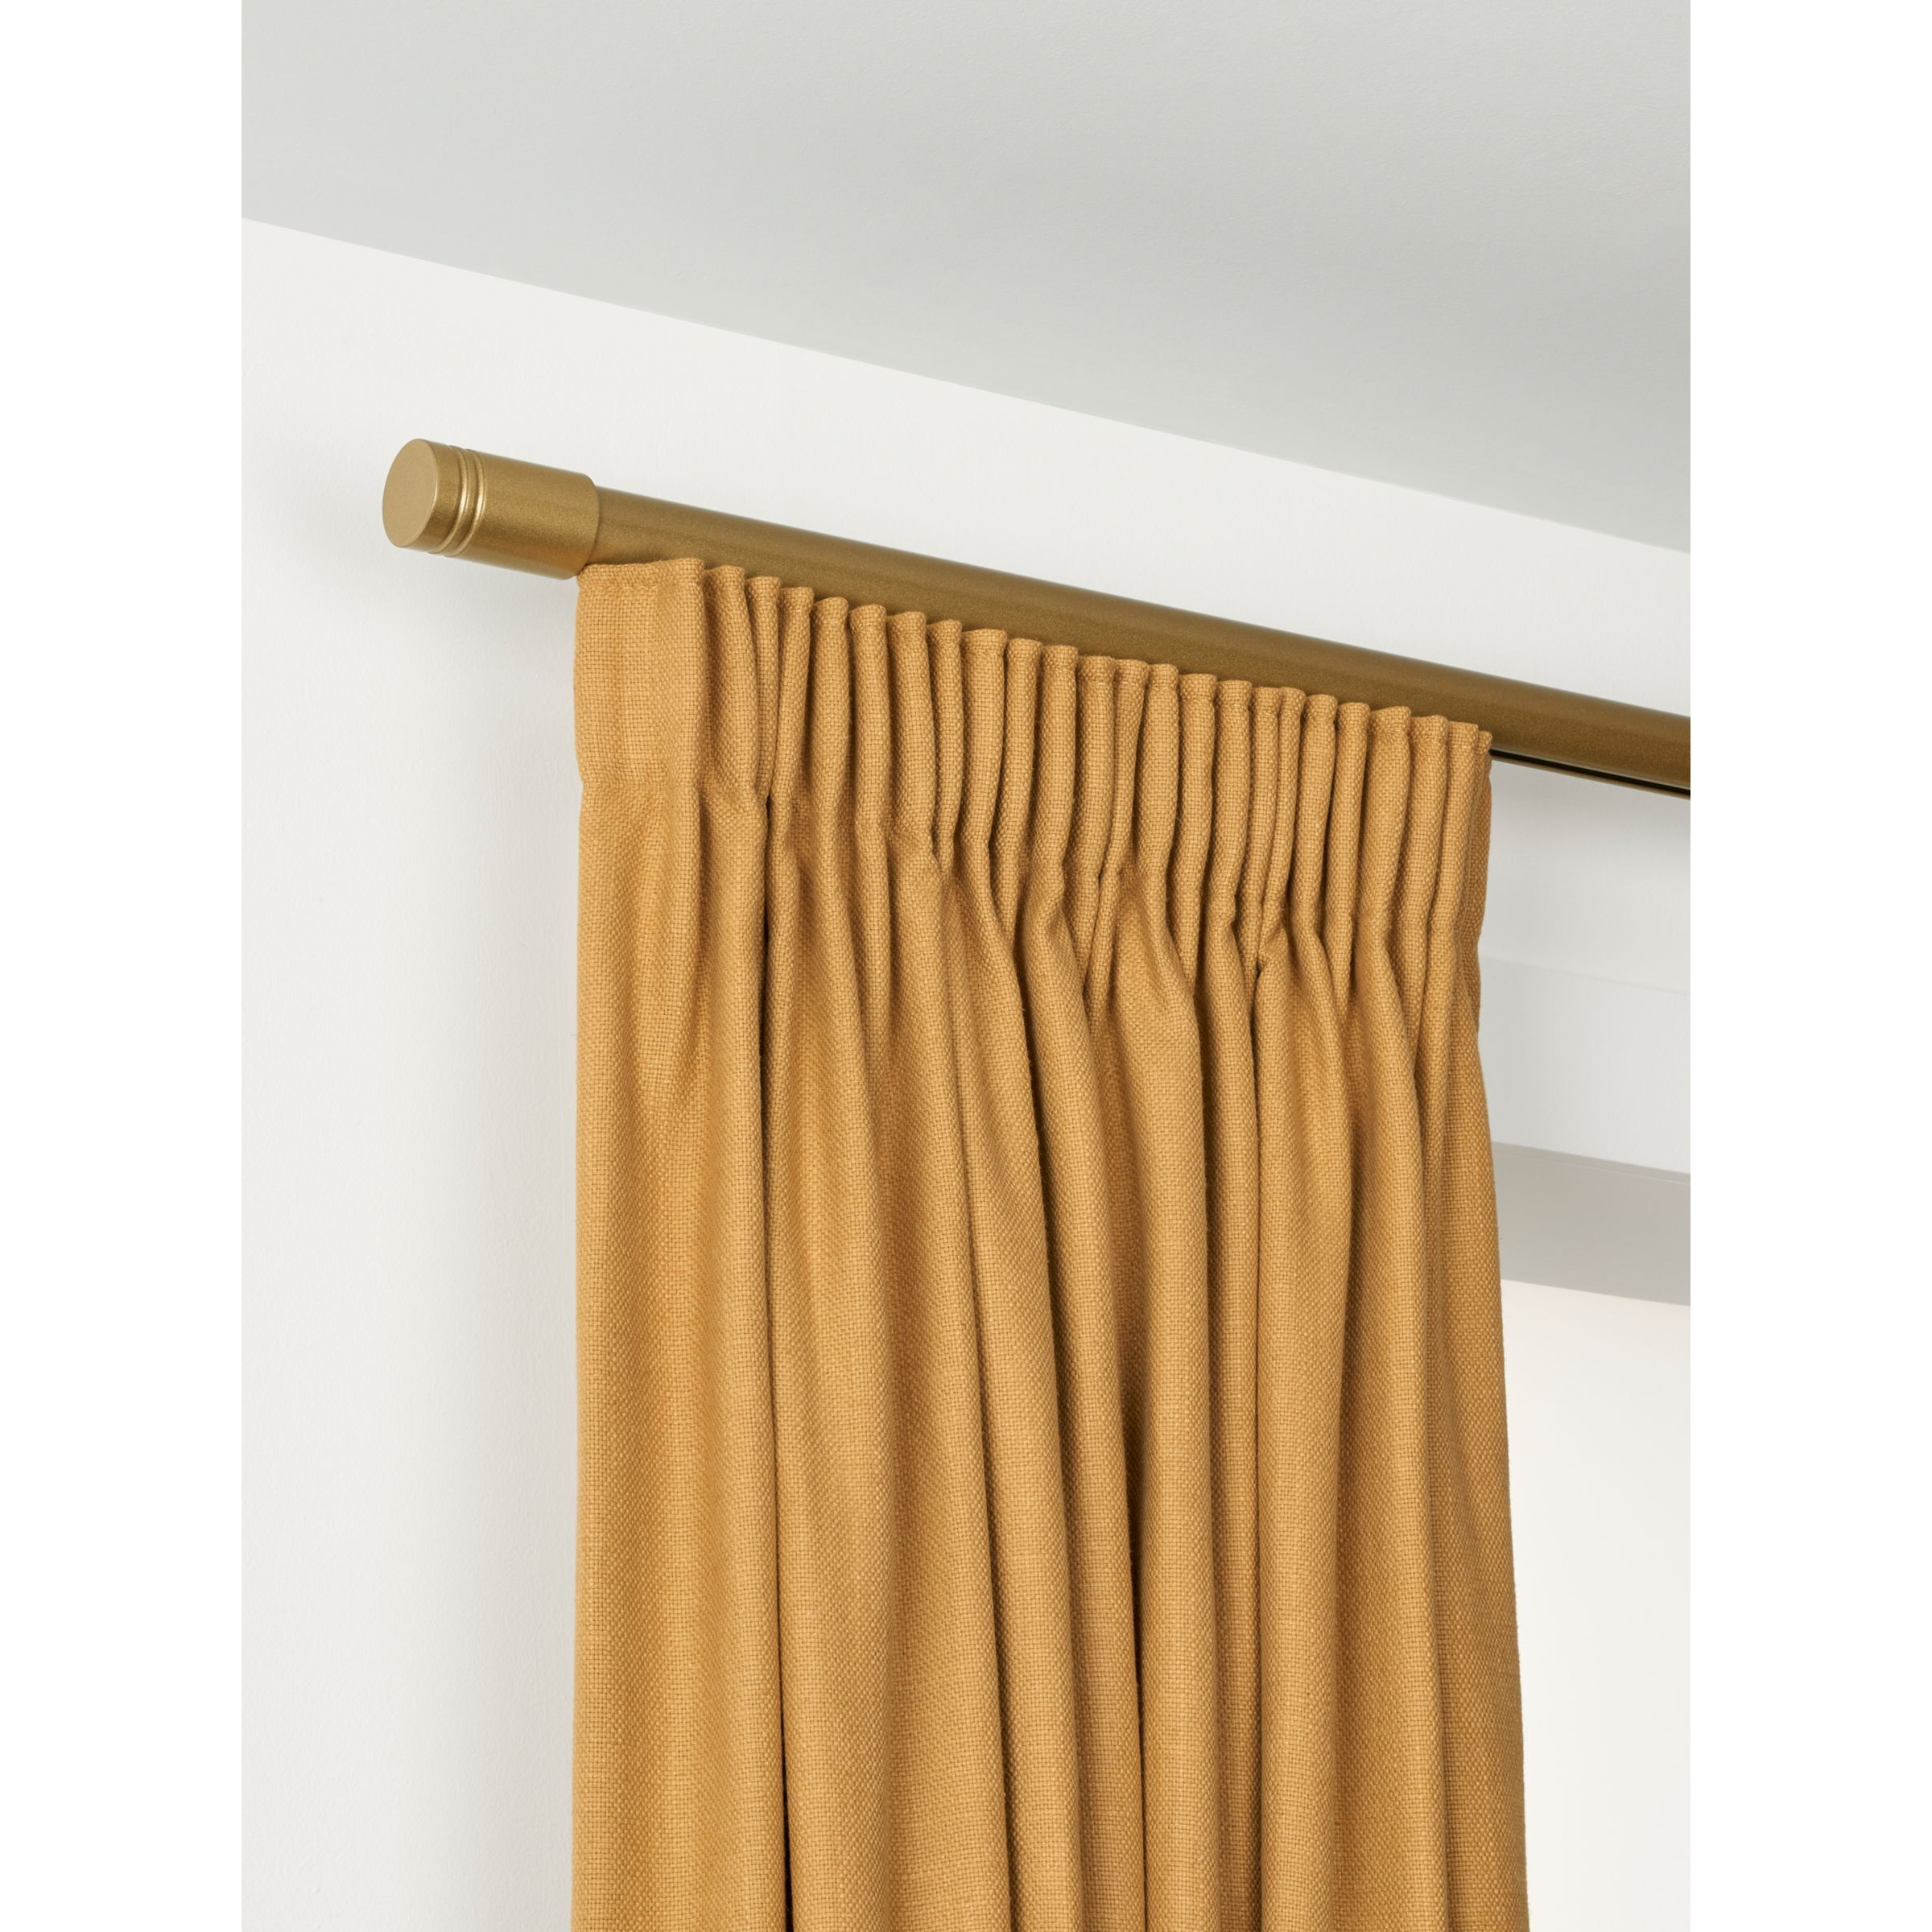 John Lewis Select Gliding Curtain Pole with Barrel Finial, Wall Fix, Dia.30mm - image 1